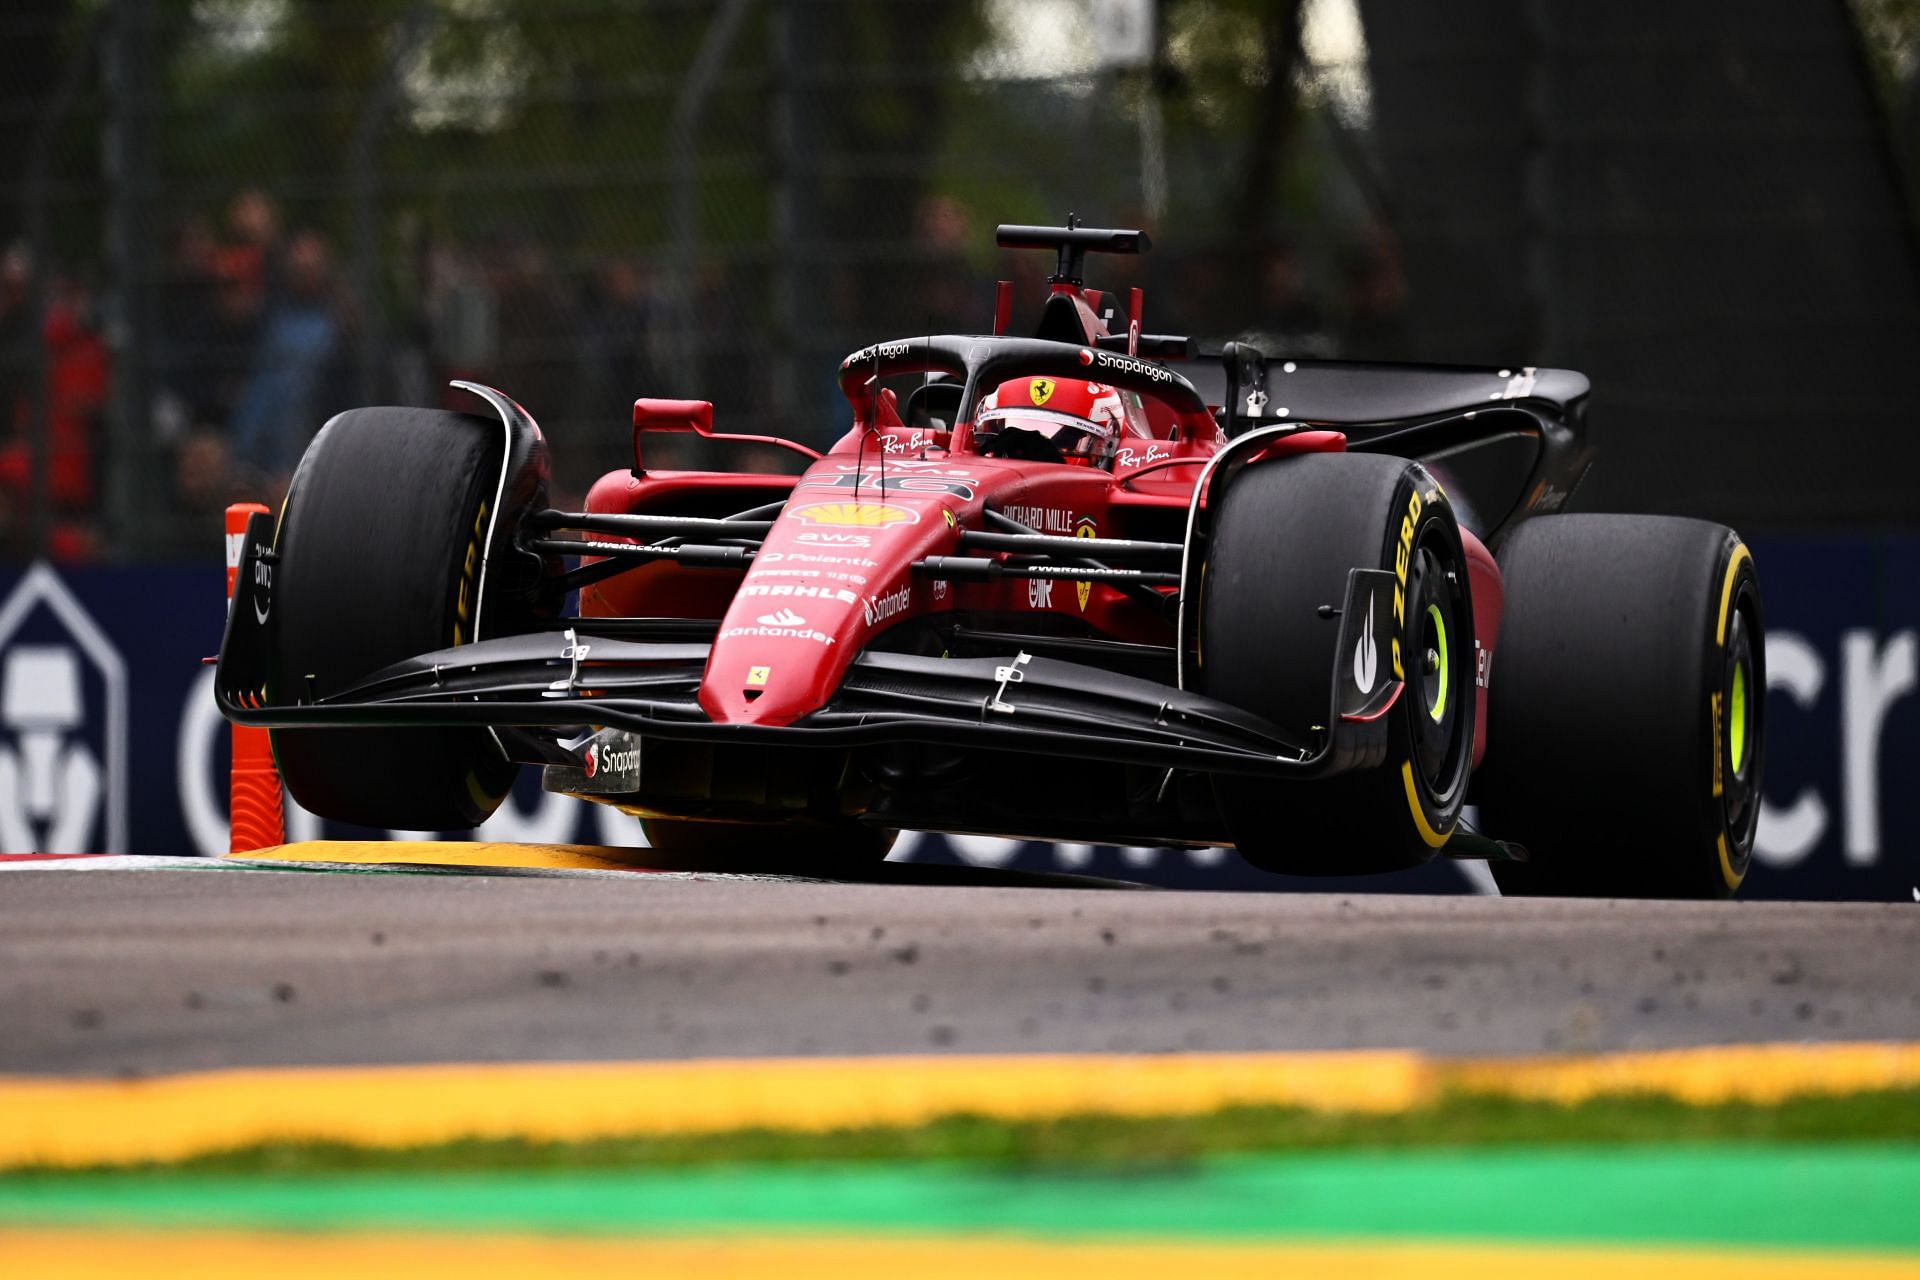 Ferrari is looking to bounce back in Miami